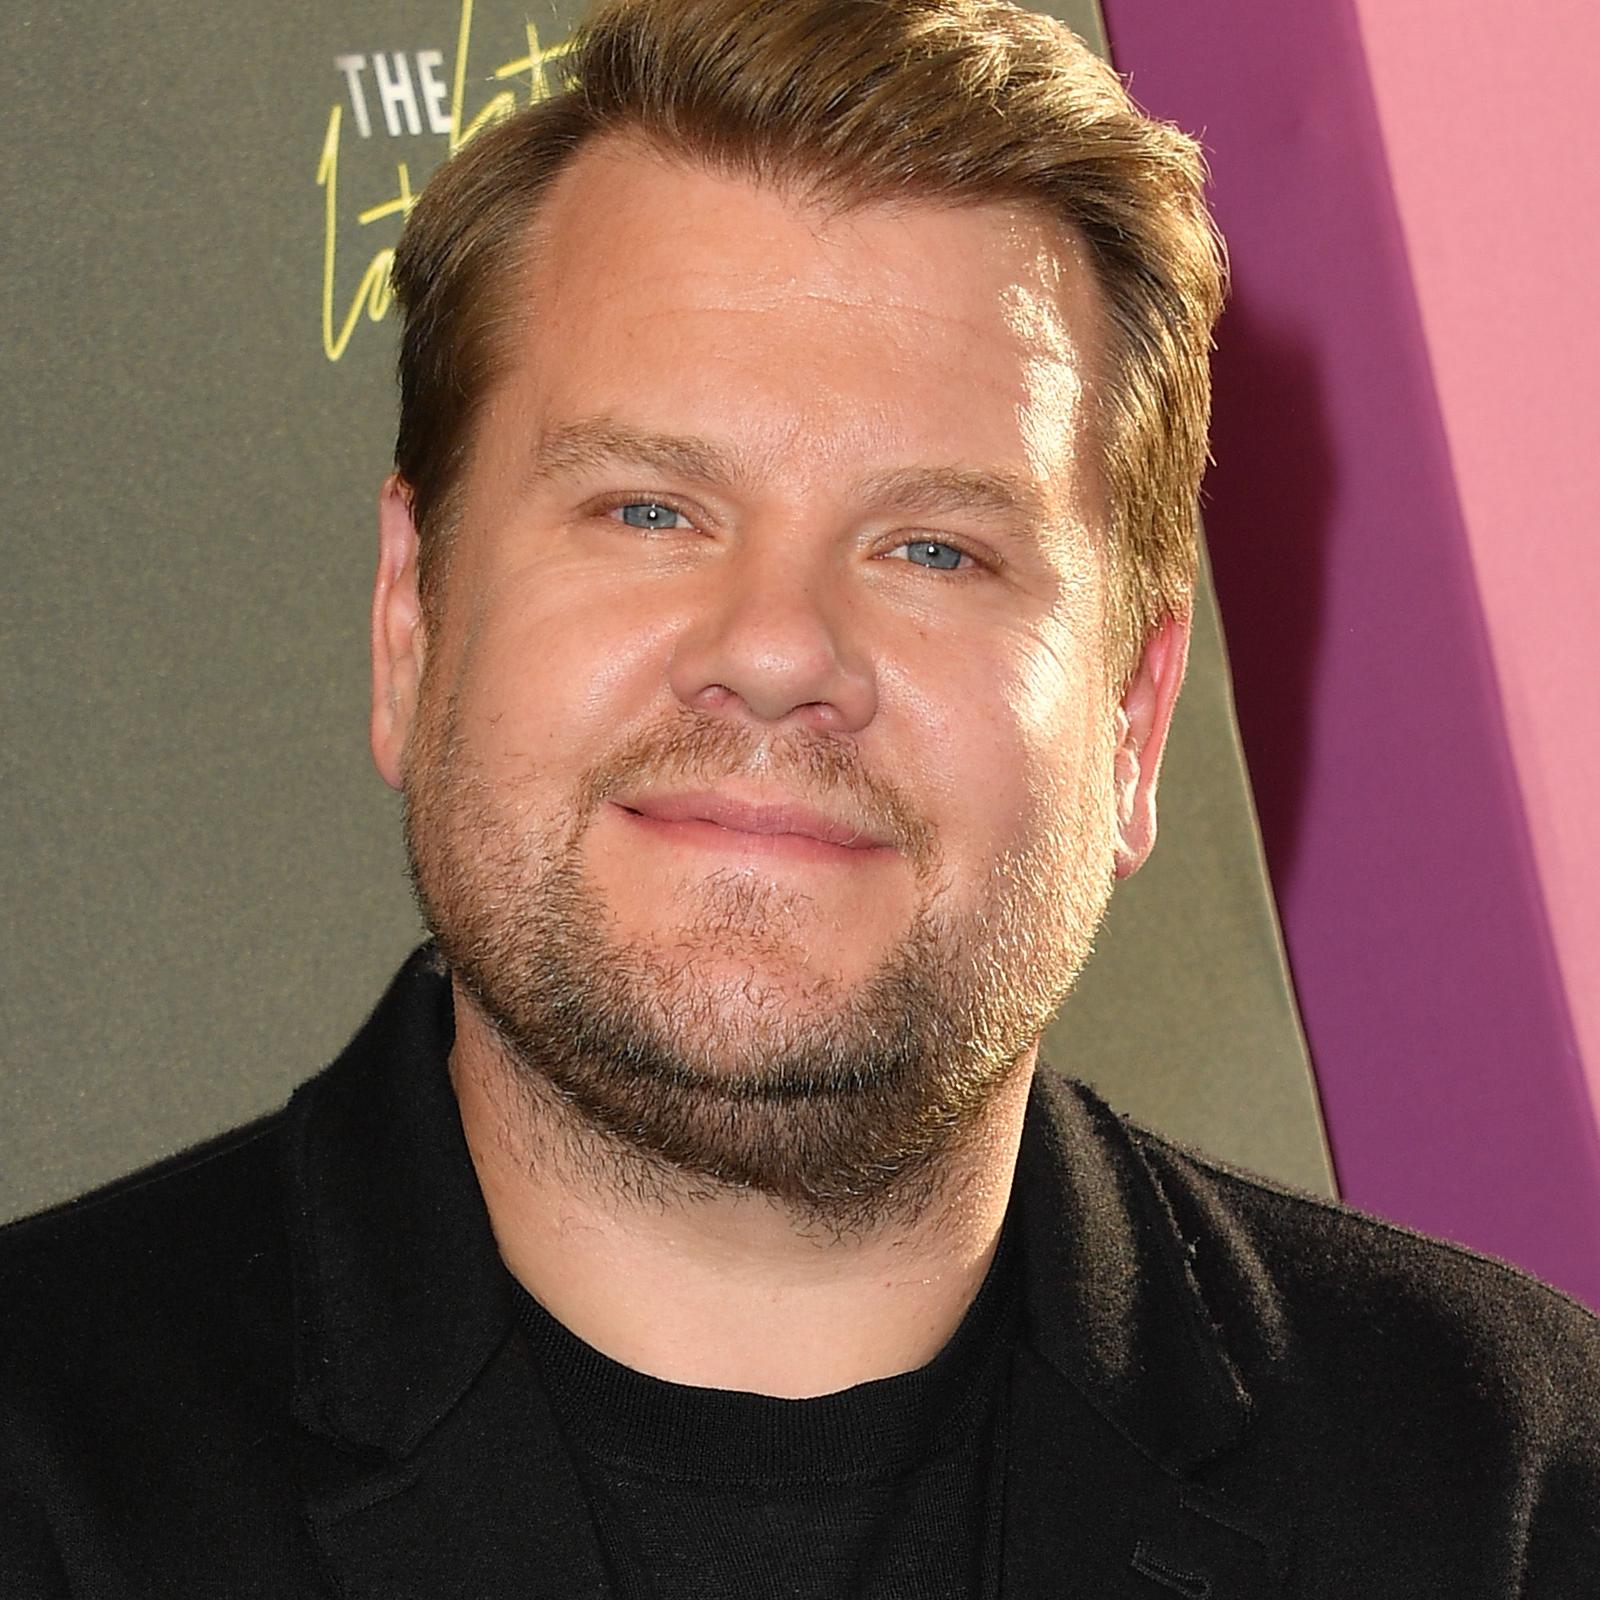 Why Do People Hate James Corden? Anecdotal Accounts, Mostly